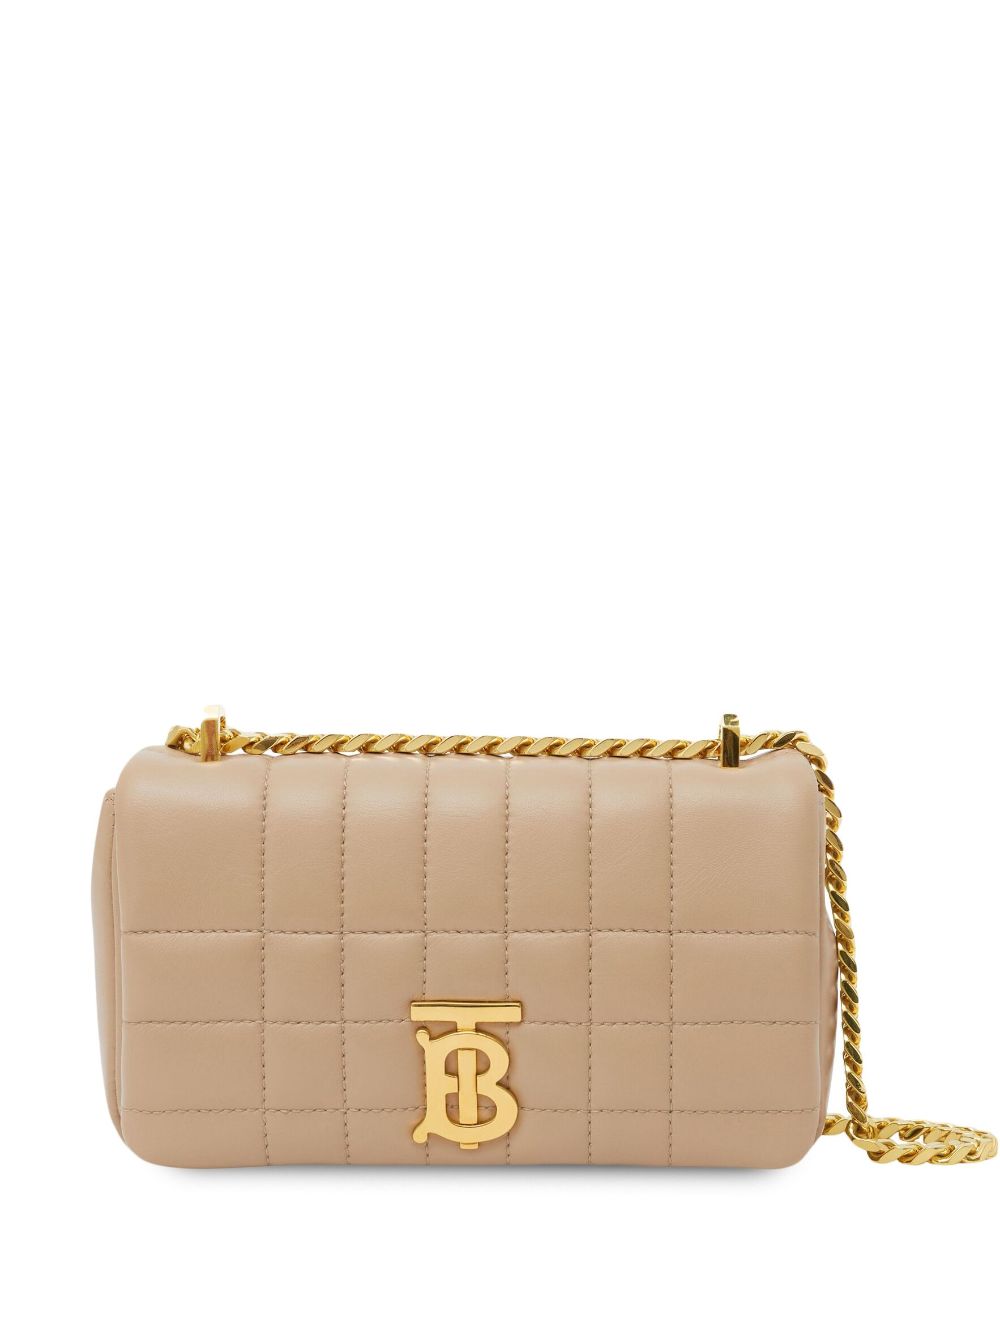 Burberry Lola Leather Quilted Mini Bag - Farfetch